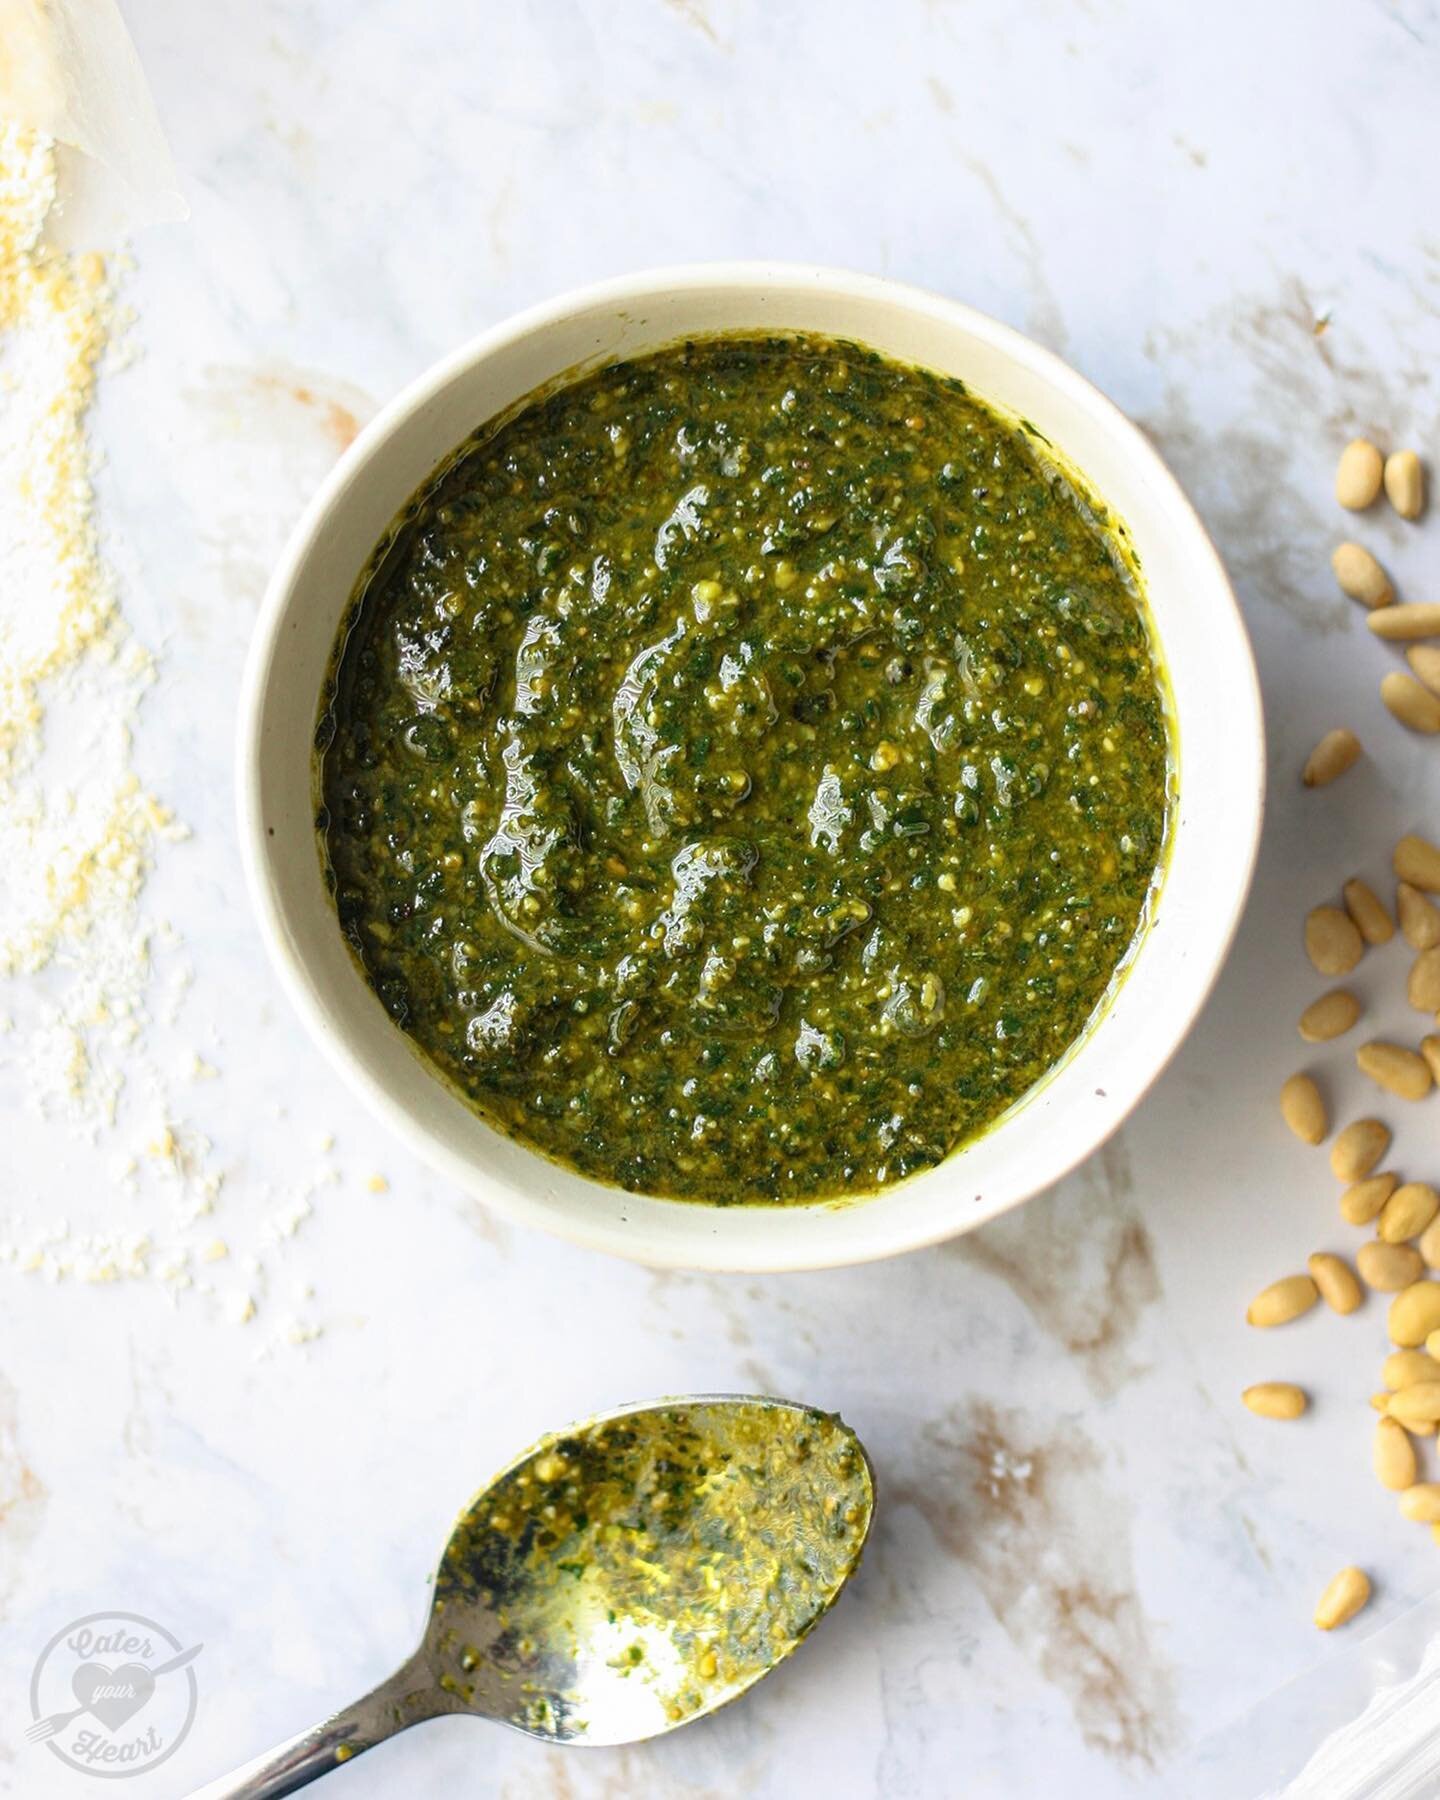 This basil pesto recipe is now live on my blog. Not just for pasta, this green sauce can be used as a marinade, a sandwich spread and even as pizza sauce. The best part is that it only takes 10 minutes to make. Head to the link in my bio for this sup